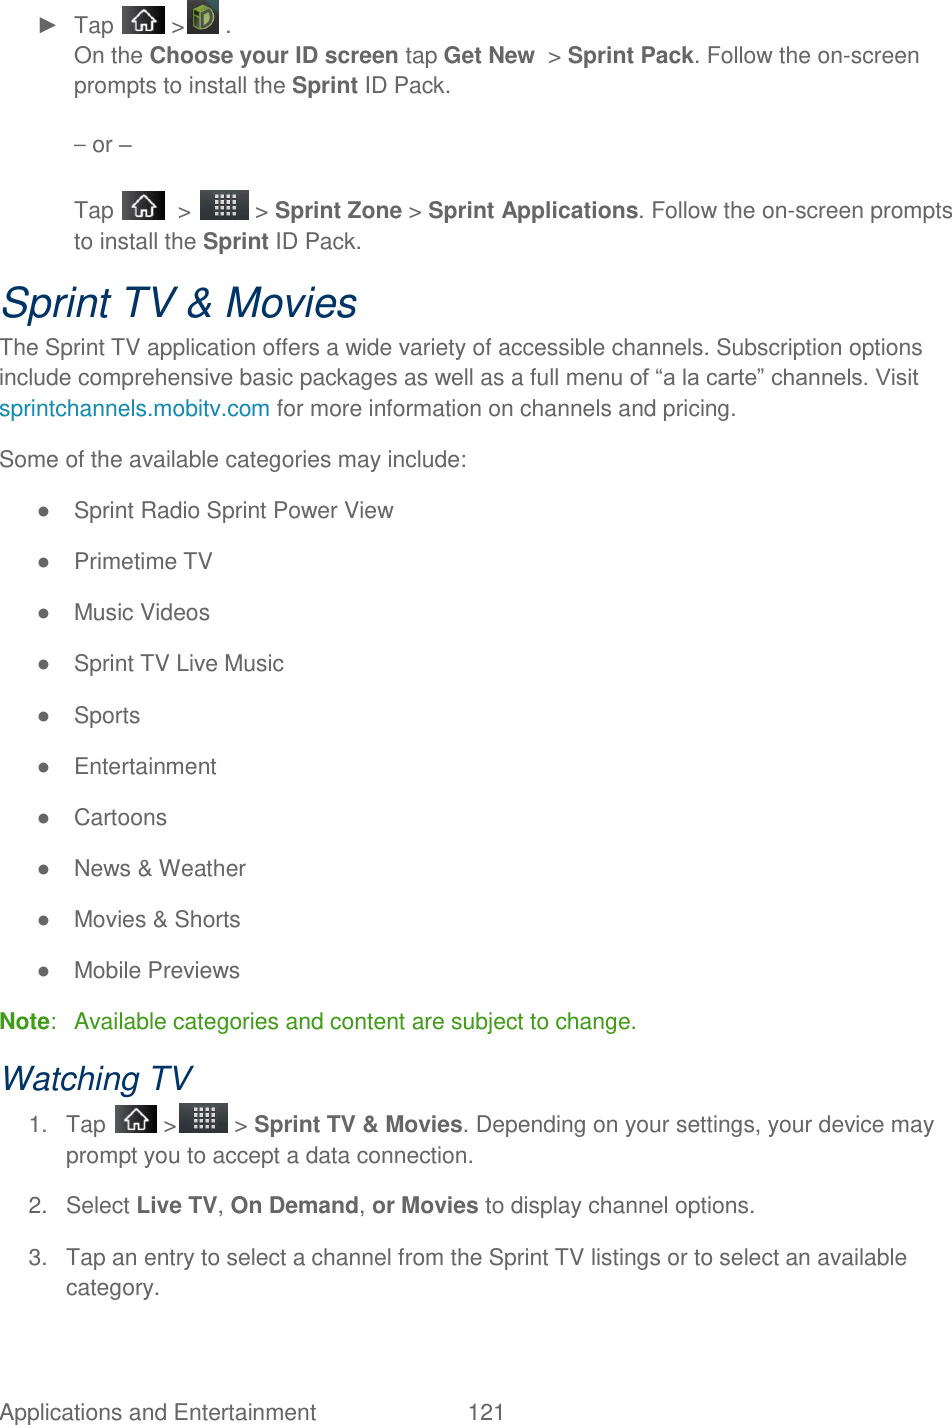 Applications and Entertainment  121 ►  Tap   &gt;  . On the Choose your ID screen tap Get New  &gt; Sprint Pack. Follow the on-screen prompts to install the Sprint ID Pack. – or – Tap    &gt;   &gt; Sprint Zone &gt; Sprint Applications. Follow the on-screen prompts to install the Sprint ID Pack. Sprint TV &amp; Movies The Sprint TV application offers a wide variety of accessible channels. Subscription options include comprehensive basic packages as well as a full menu of ―a la carte‖ channels. Visit sprintchannels.mobitv.com for more information on channels and pricing. Some of the available categories may include: ●  Sprint Radio Sprint Power View ●  Primetime TV  ●  Music Videos ●  Sprint TV Live Music ●  Sports  ●  Entertainment ●  Cartoons  ●  News &amp; Weather ●  Movies &amp; Shorts  ●  Mobile Previews Note:   Available categories and content are subject to change. Watching TV 1.  Tap   &gt;  &gt; Sprint TV &amp; Movies. Depending on your settings, your device may prompt you to accept a data connection. 2.  Select Live TV, On Demand, or Movies to display channel options. 3.  Tap an entry to select a channel from the Sprint TV listings or to select an available category. 